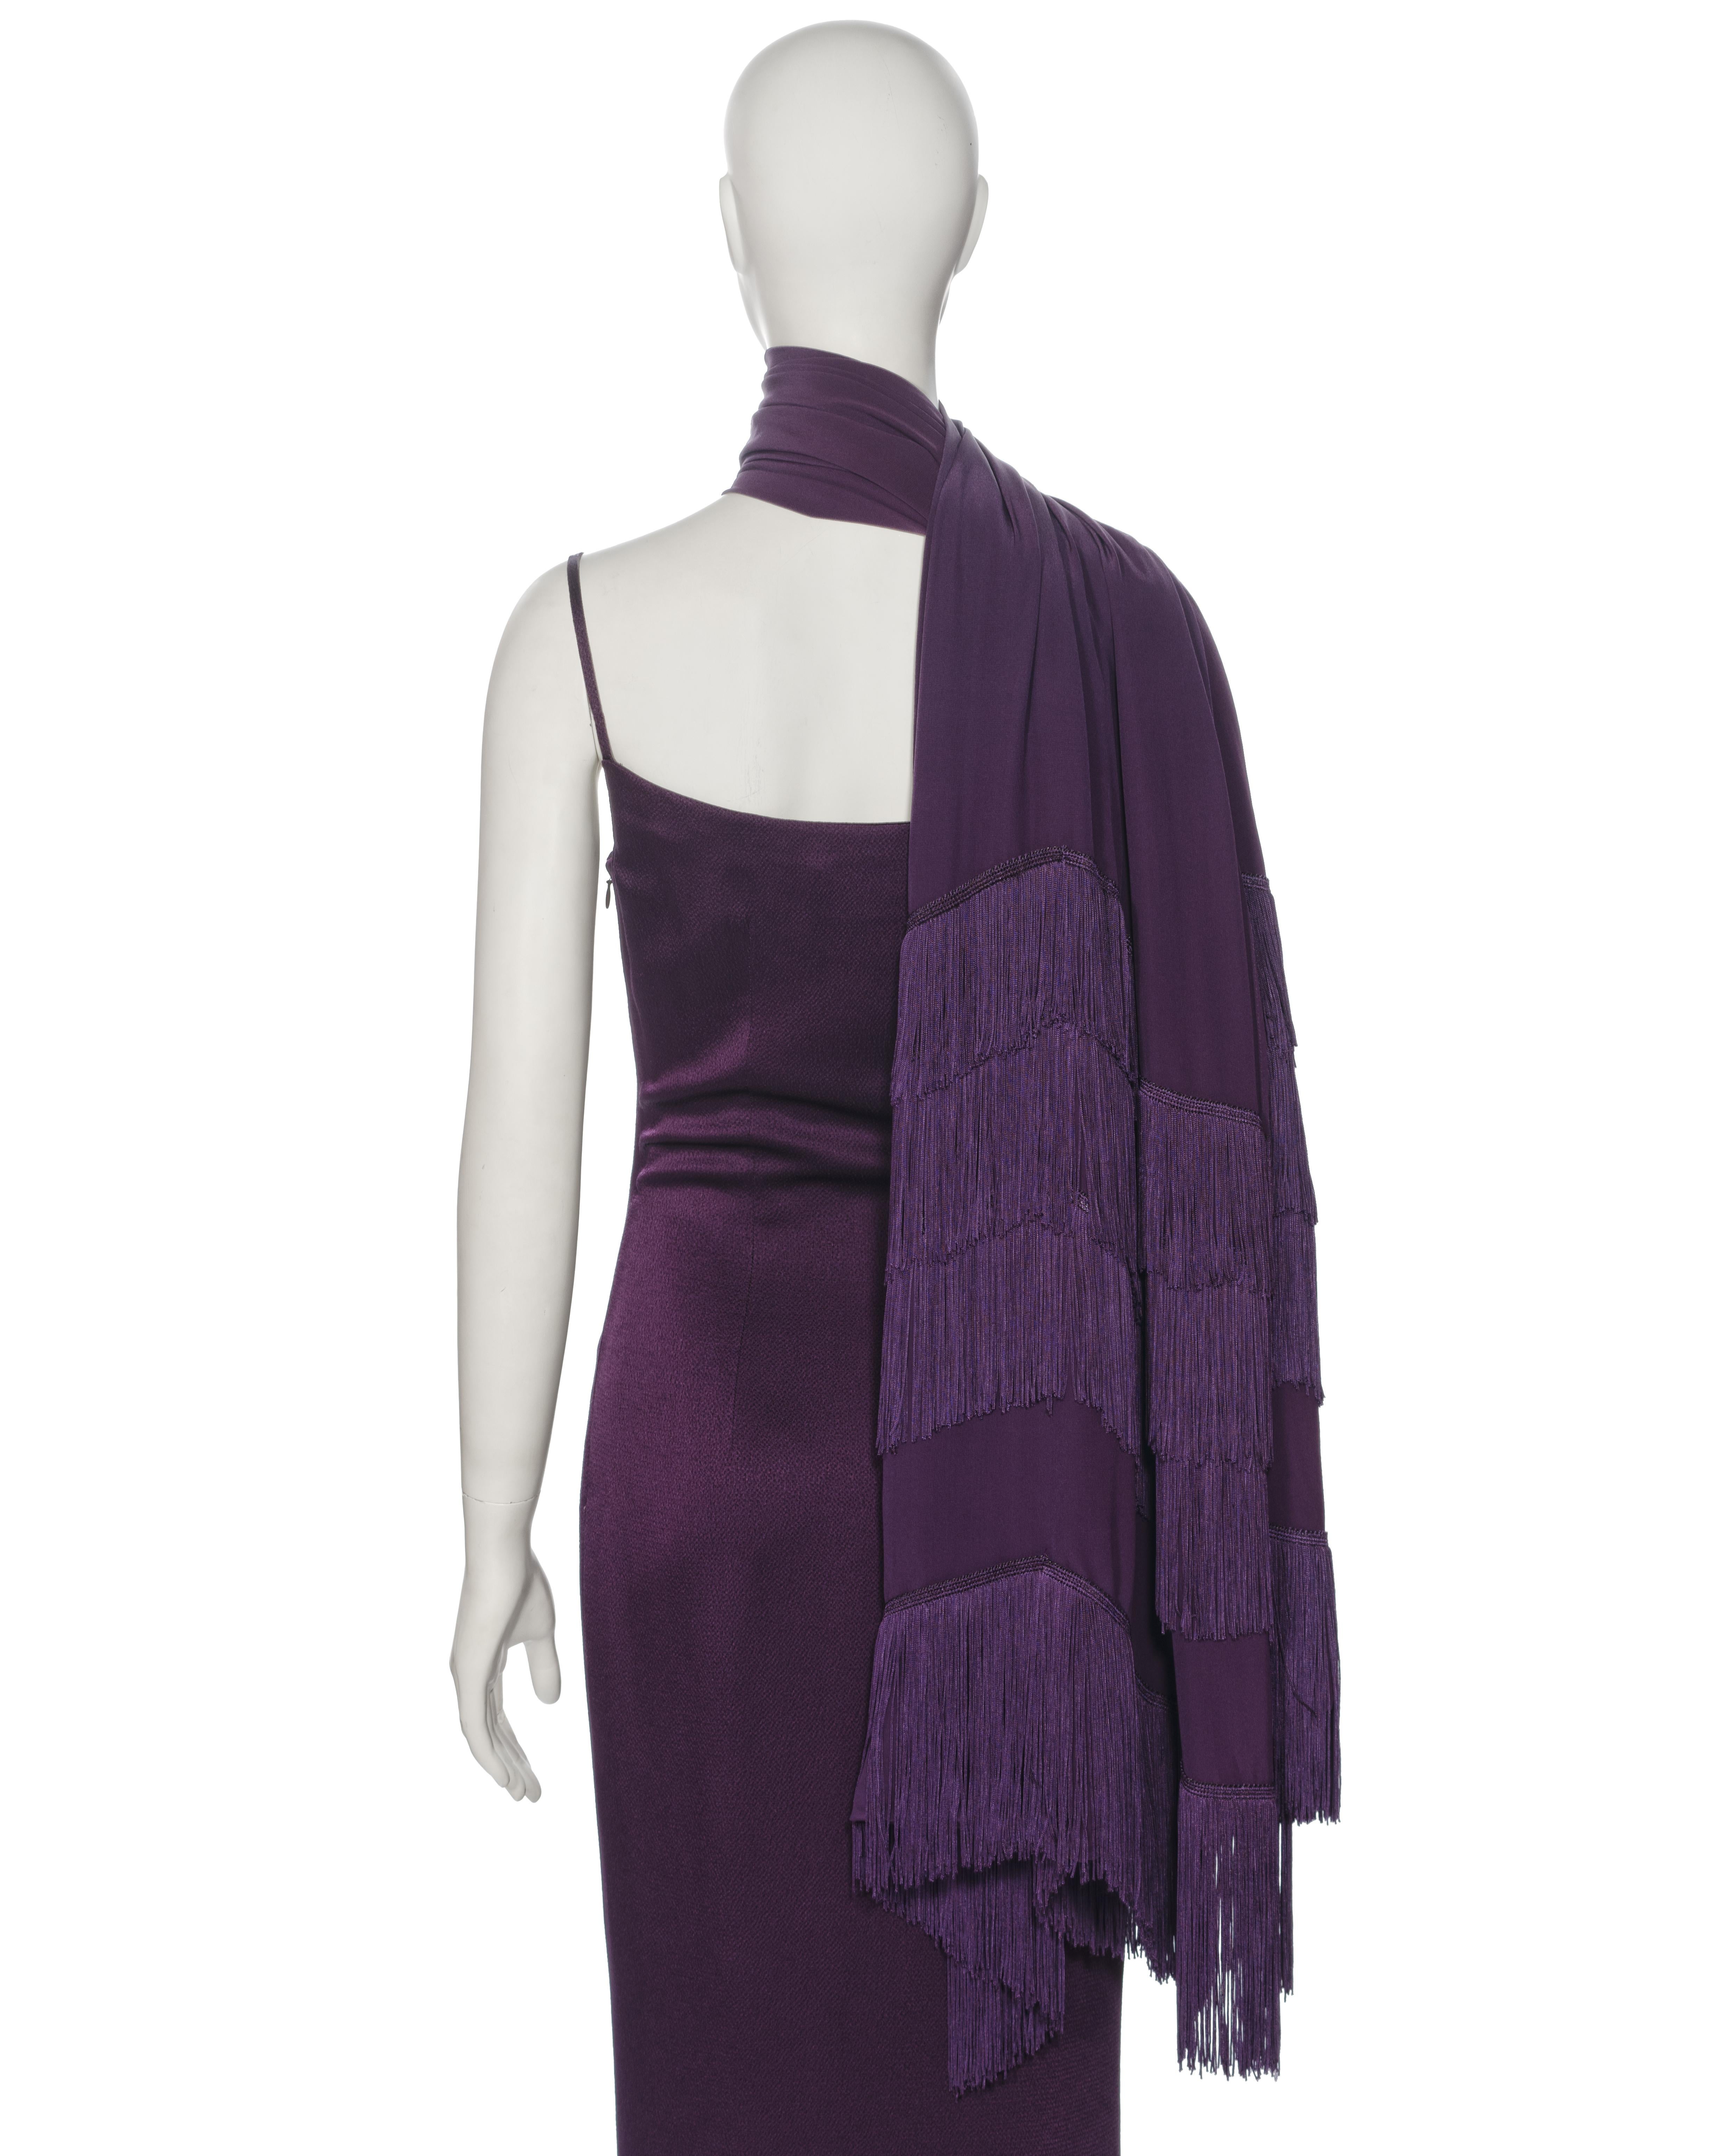 Christian Dior by John Galliano Purple Satin Evening Dress and Shawl, ss 1998 For Sale 6